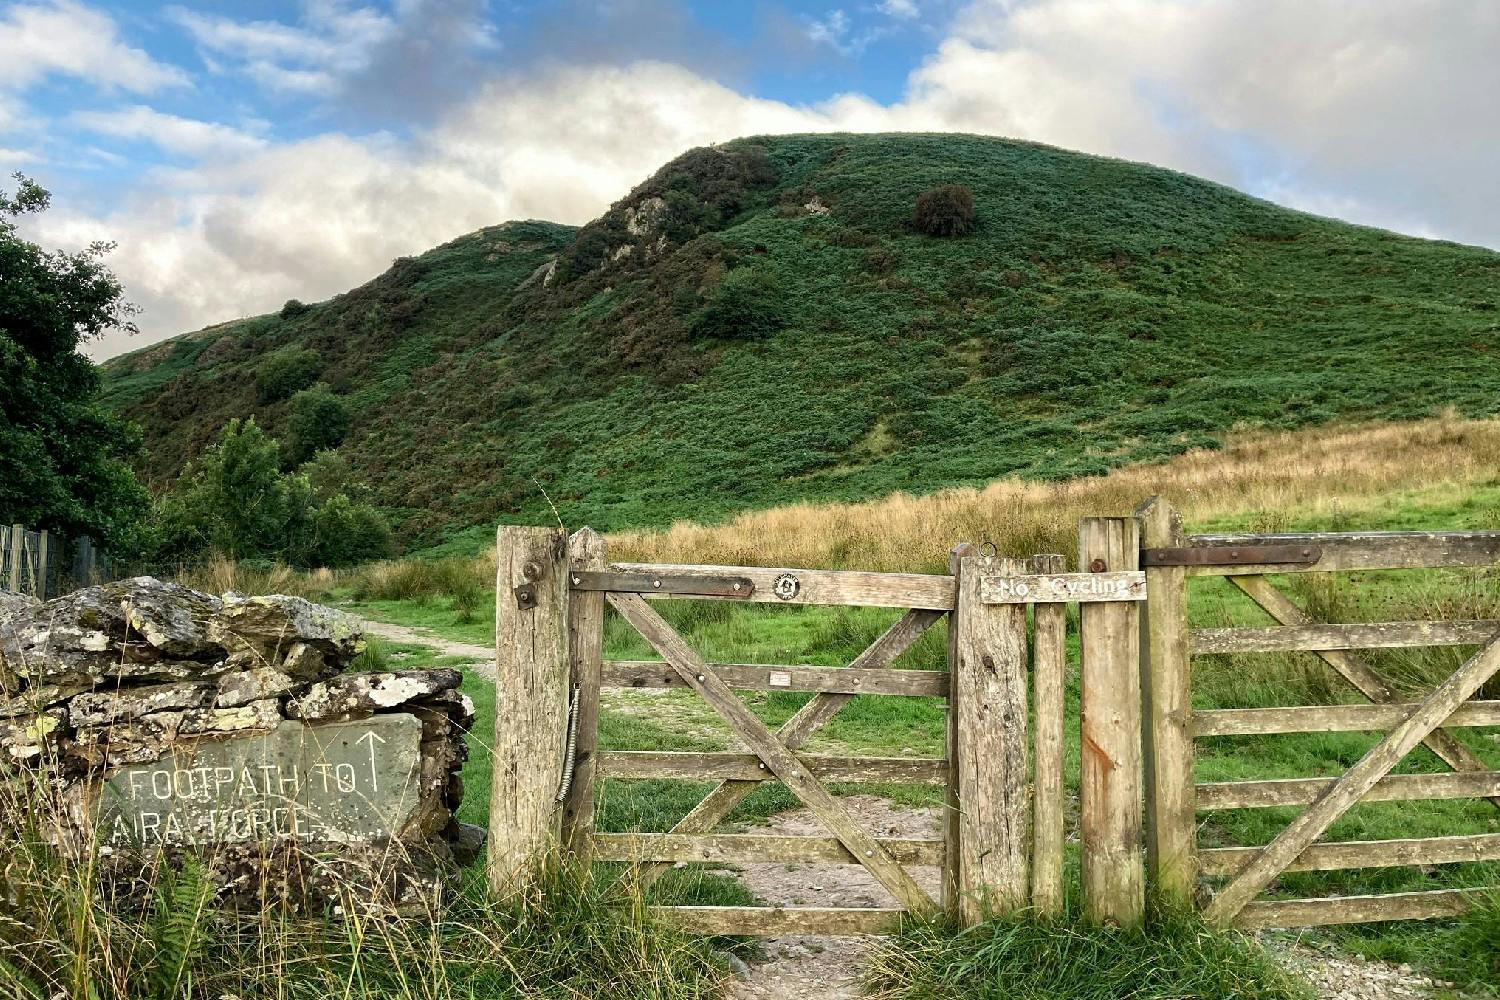 uk-best-walks-and-hikes-part-3-the-ullswater-way